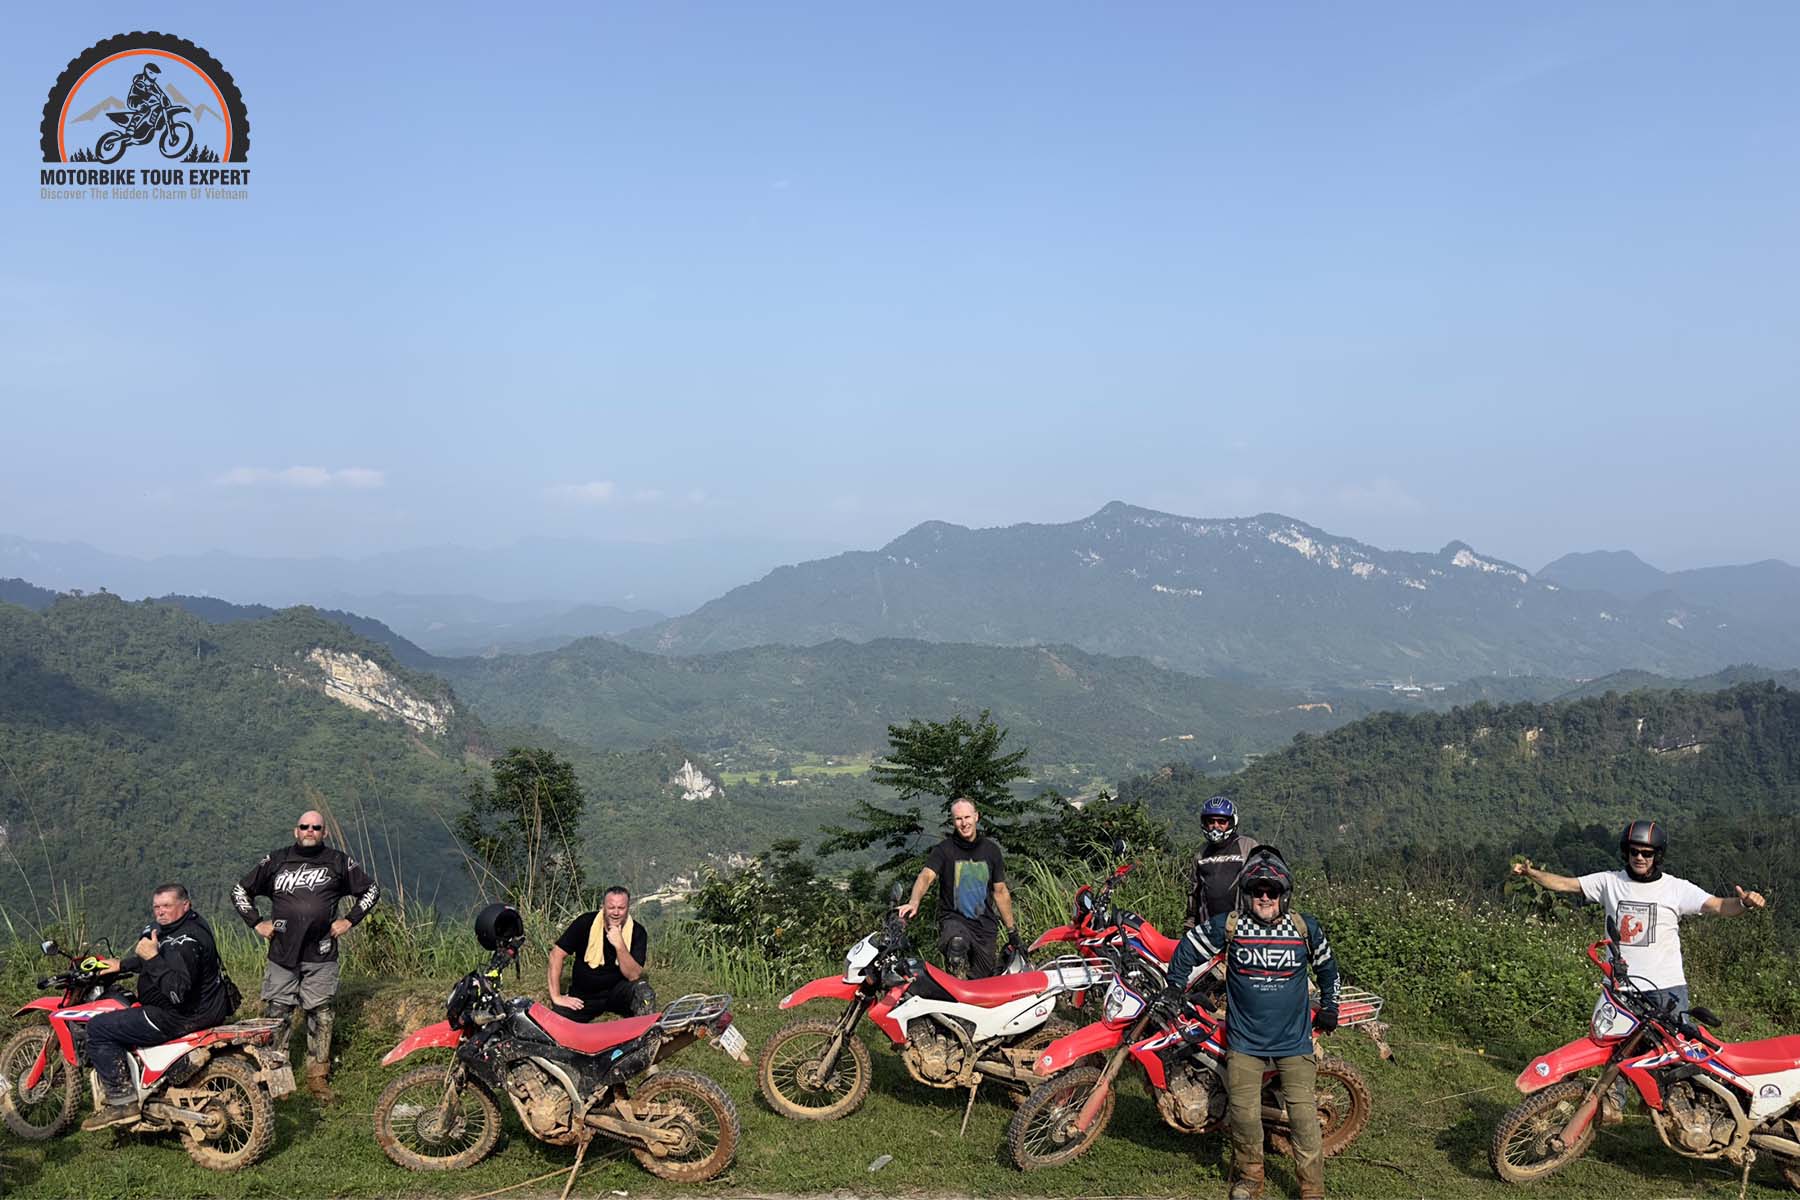 Make plan a motorbike trip & highlighting the attractions